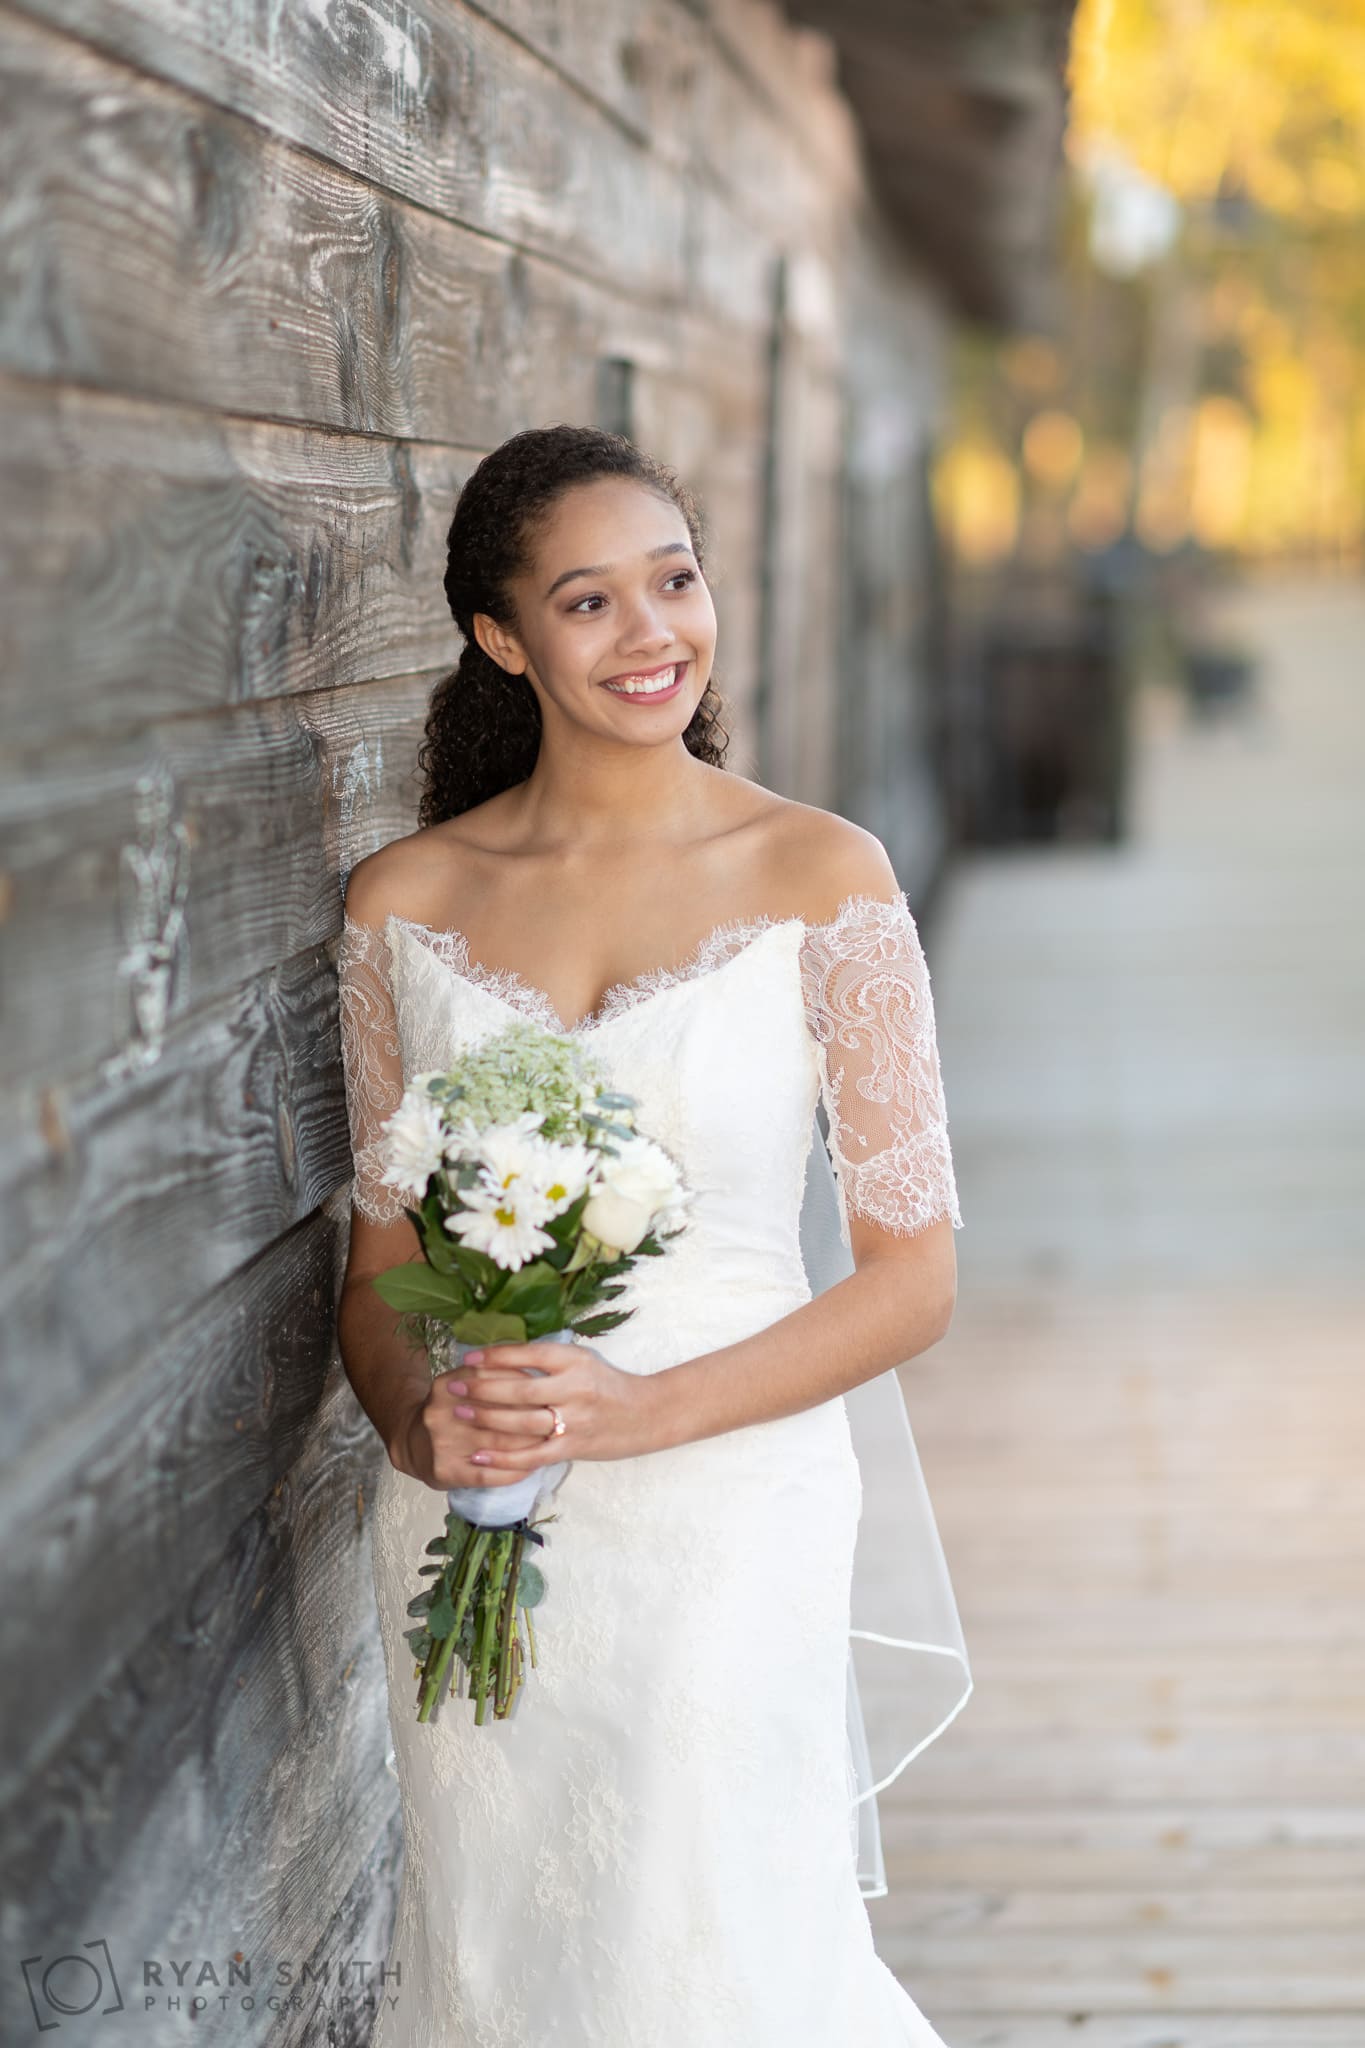 Bridal portraits leaning on the old wood of the rustic building - Conway Riverwalk